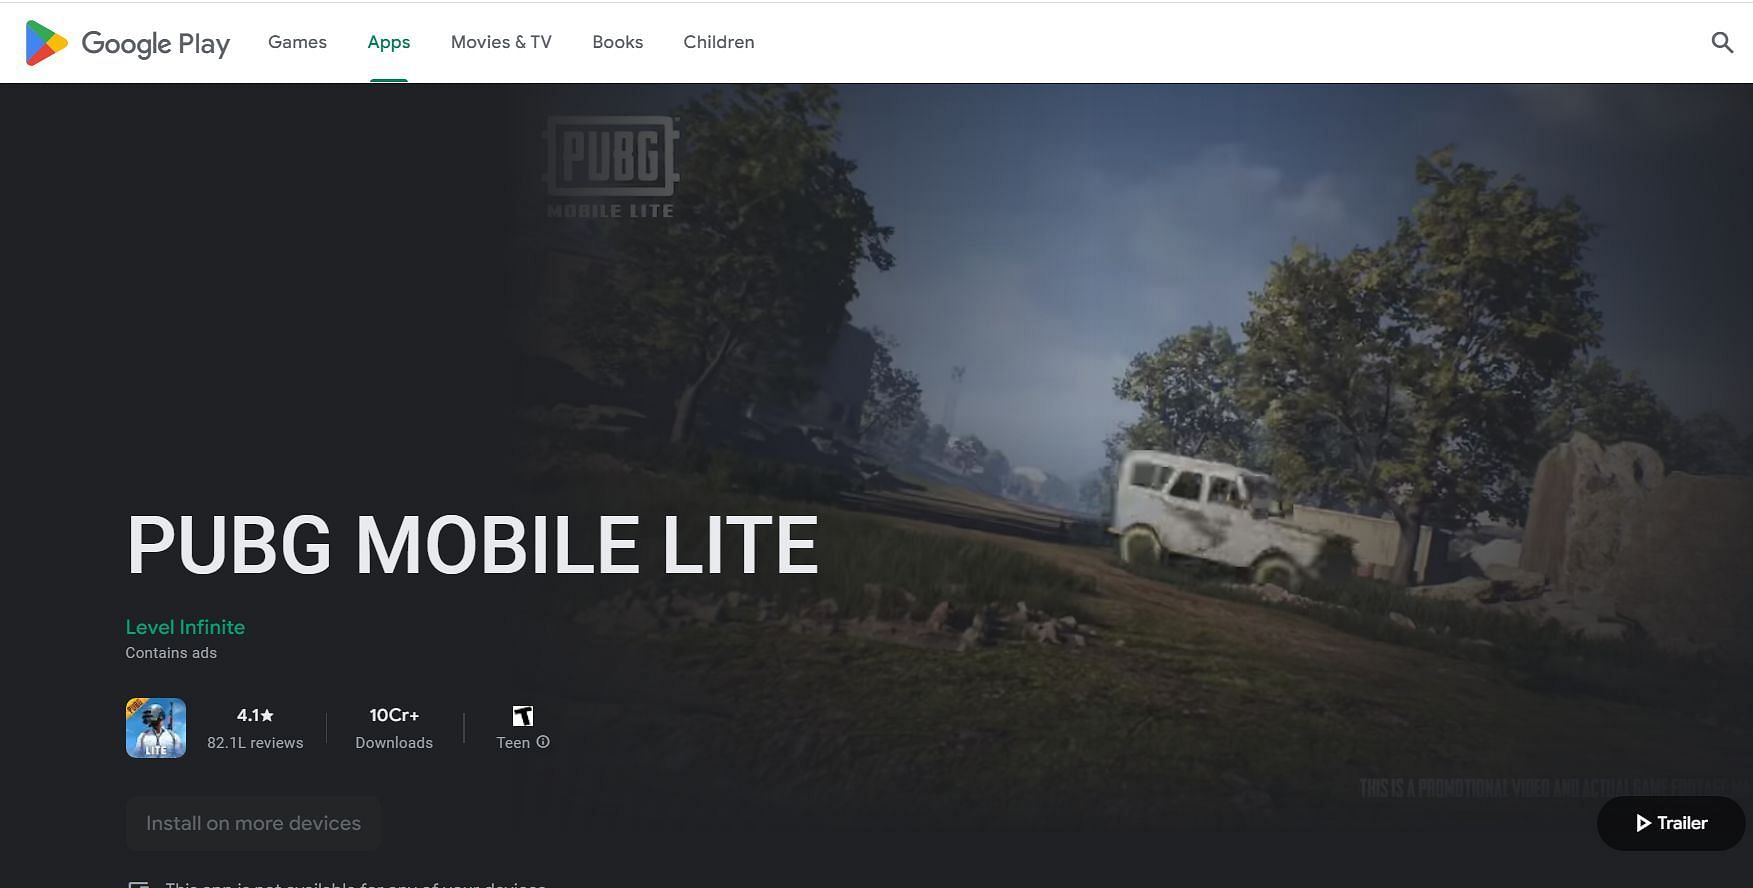 Play Store page for PUBG Mobile Lite (Image via Google)